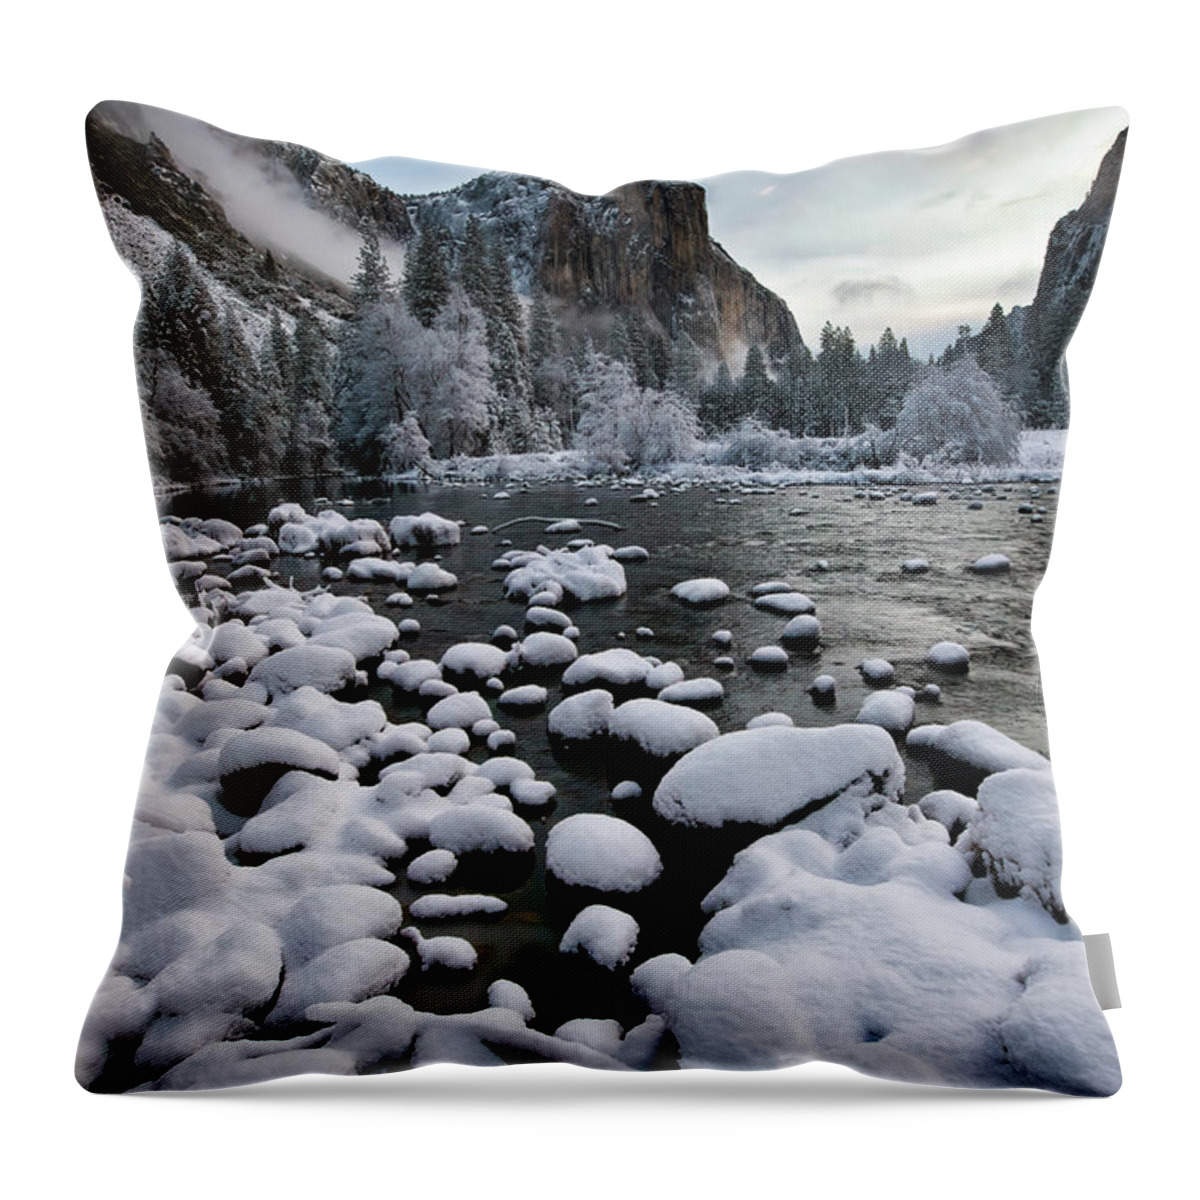 Yosemite Throw Pillow featuring the photograph Snowy Rocks by Alan Kepler